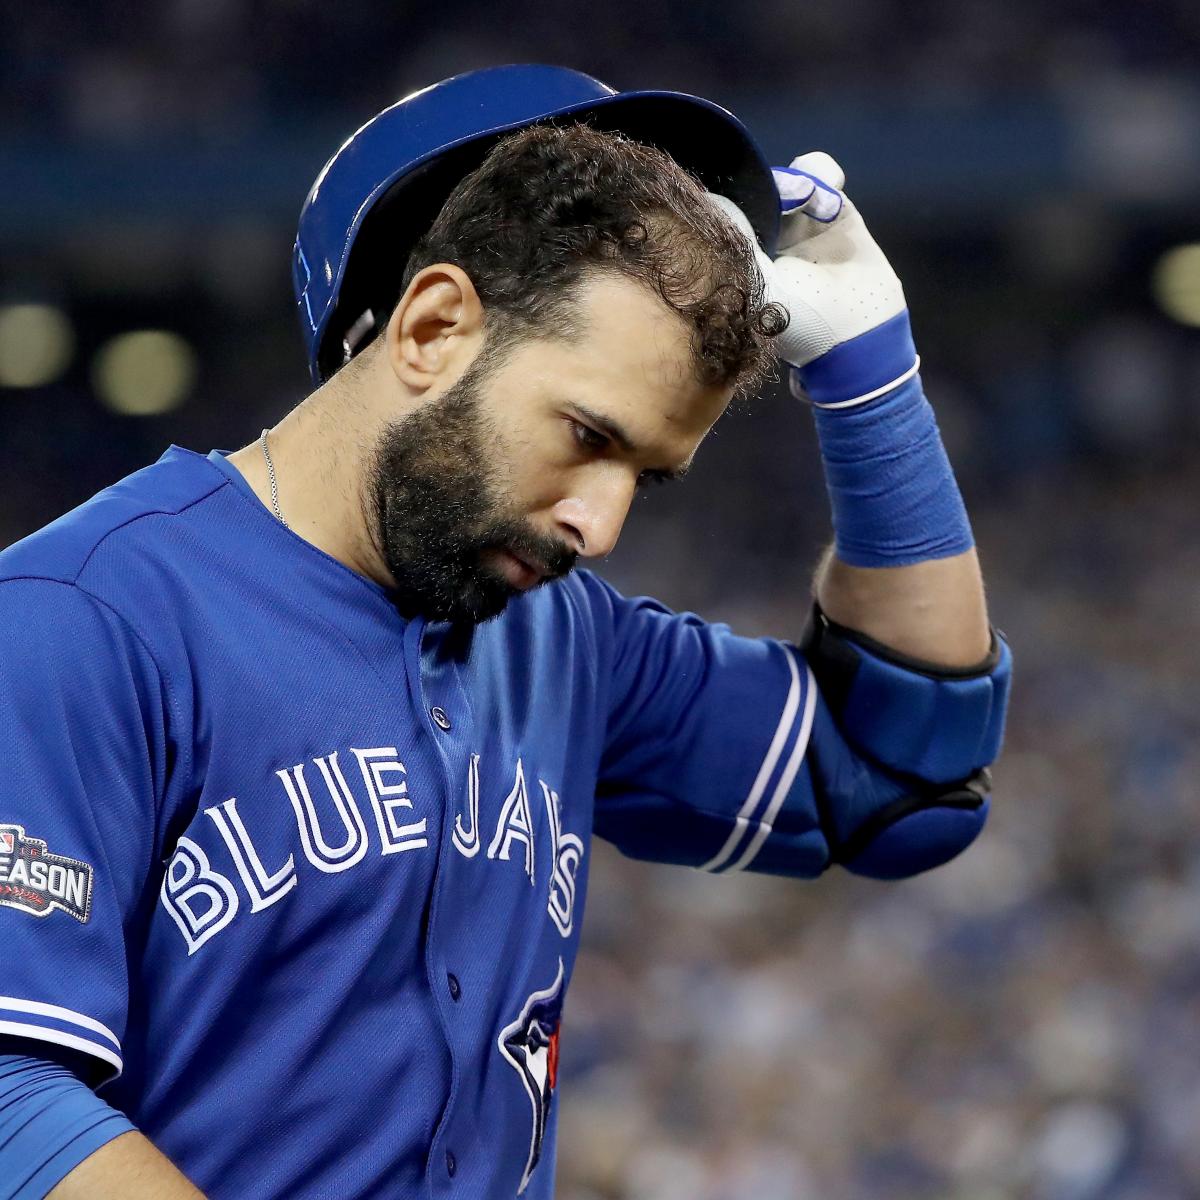 MLB Rumors: Jose Bautista Wants to Play in 2020 After Sitting Out